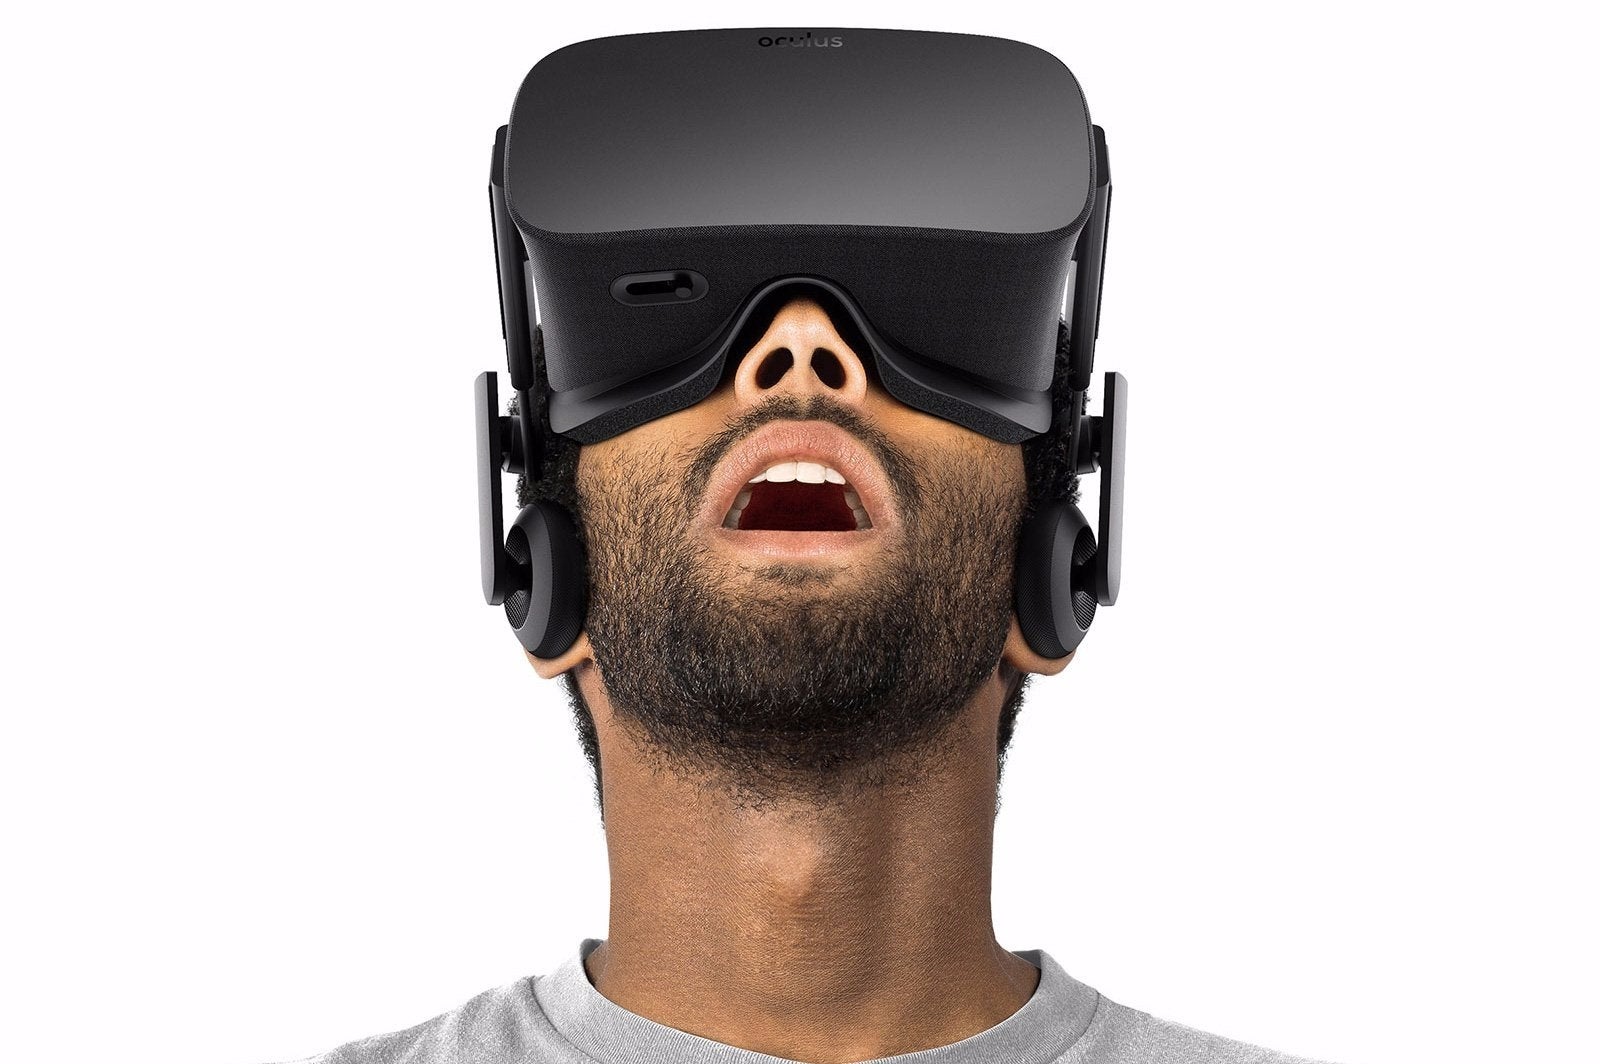 Image for Oculus Rift costs £500